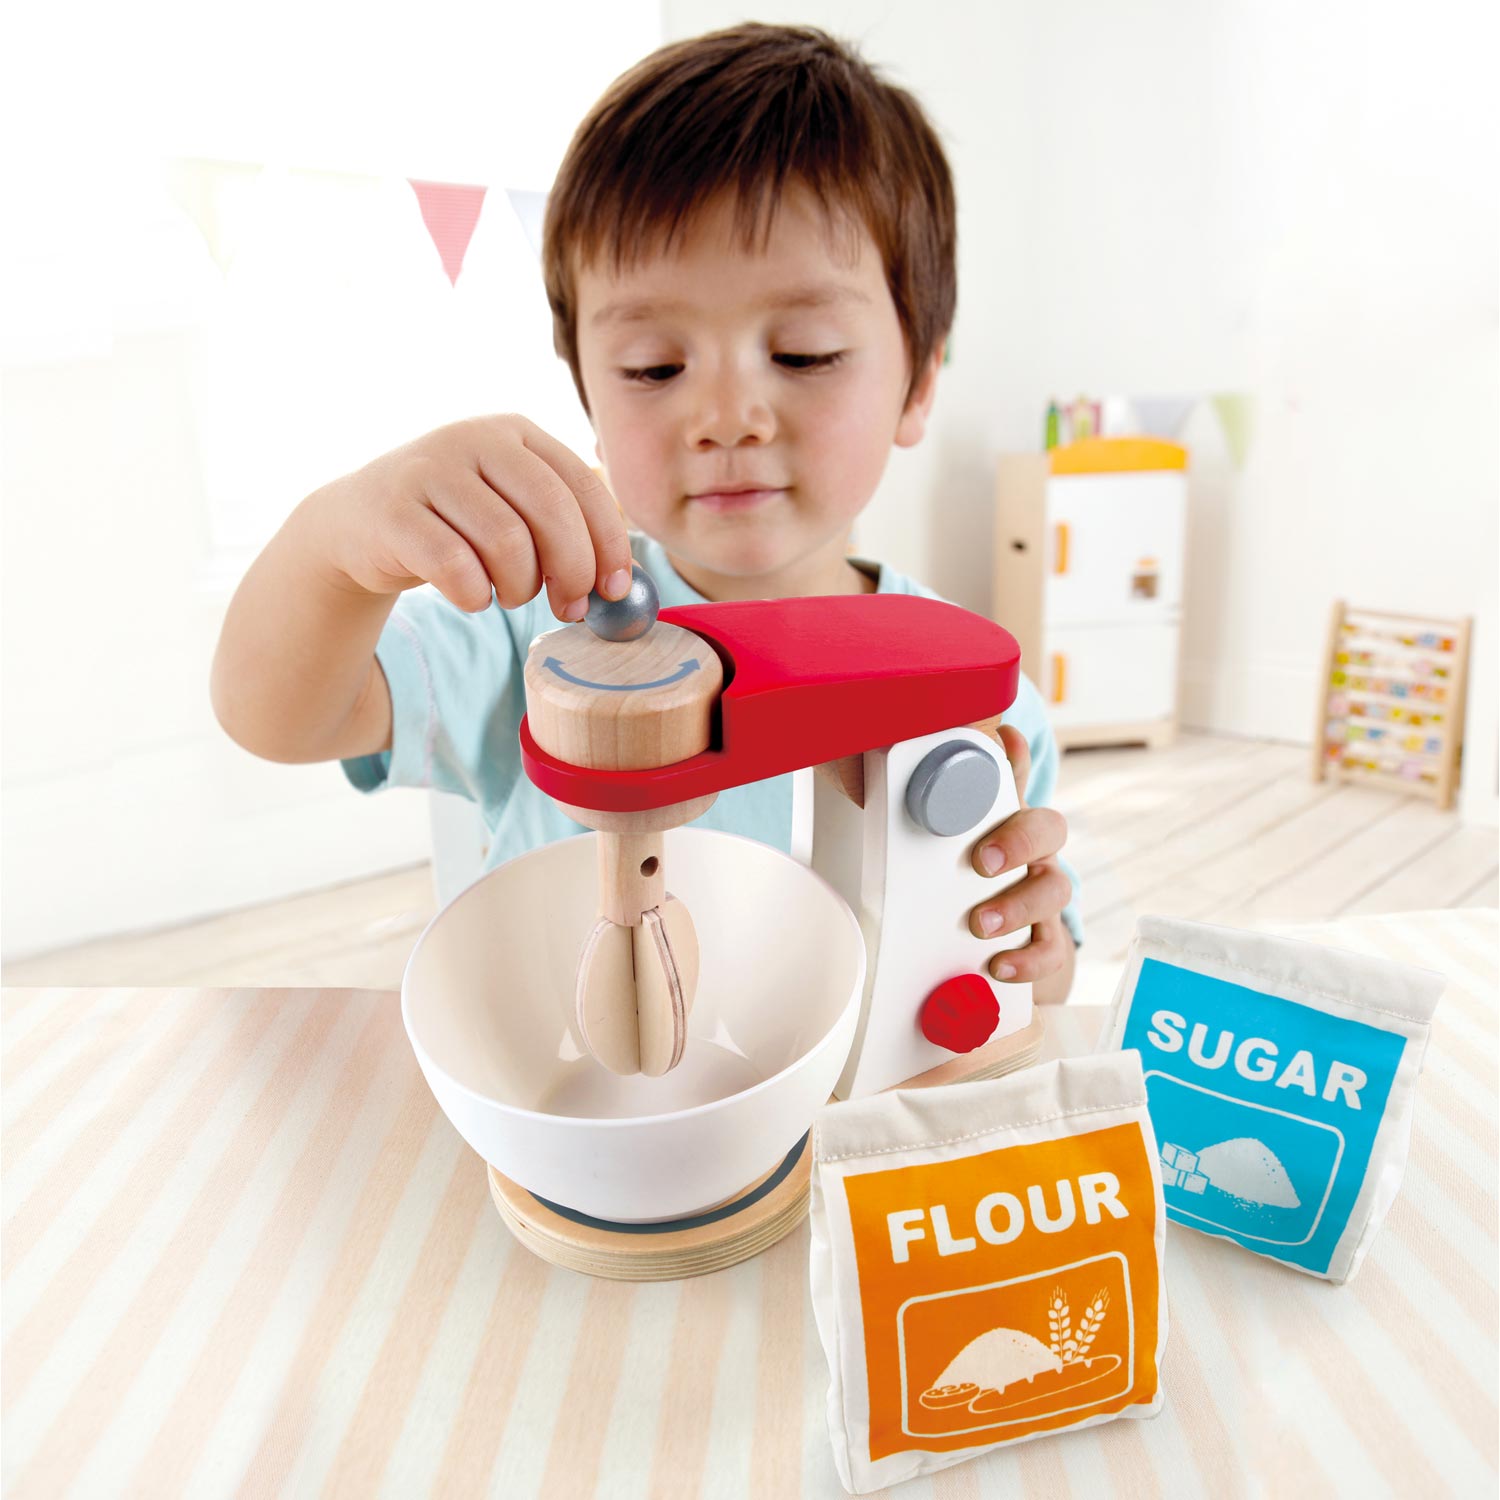 Explore Blenders Fueled by Your Imagination